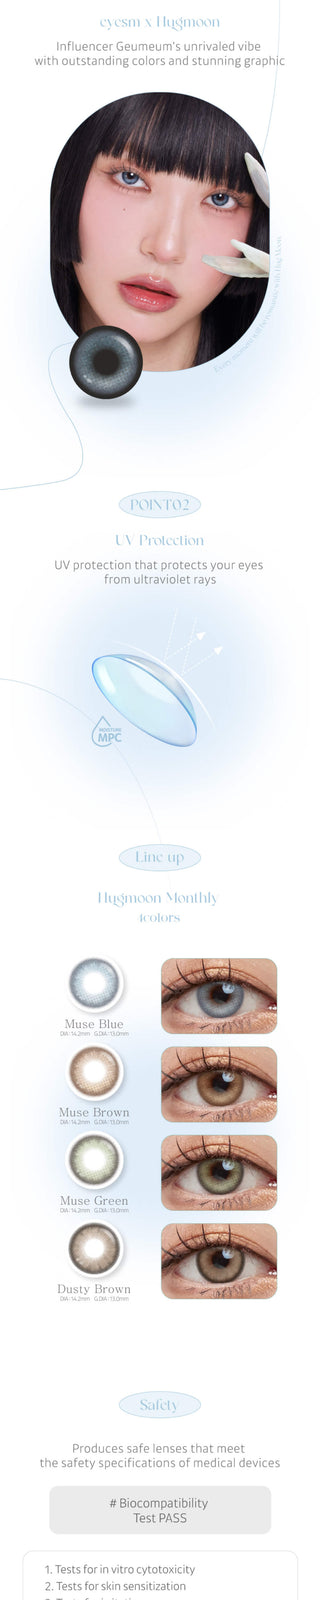 The Eyesm Hugmoon Muse Blue contact lens hue from different perspectives on a model. different close-ups of eyes with the colour lens, displaying the subtle but natural change on dark brown, natural brown, and light brown eyes.